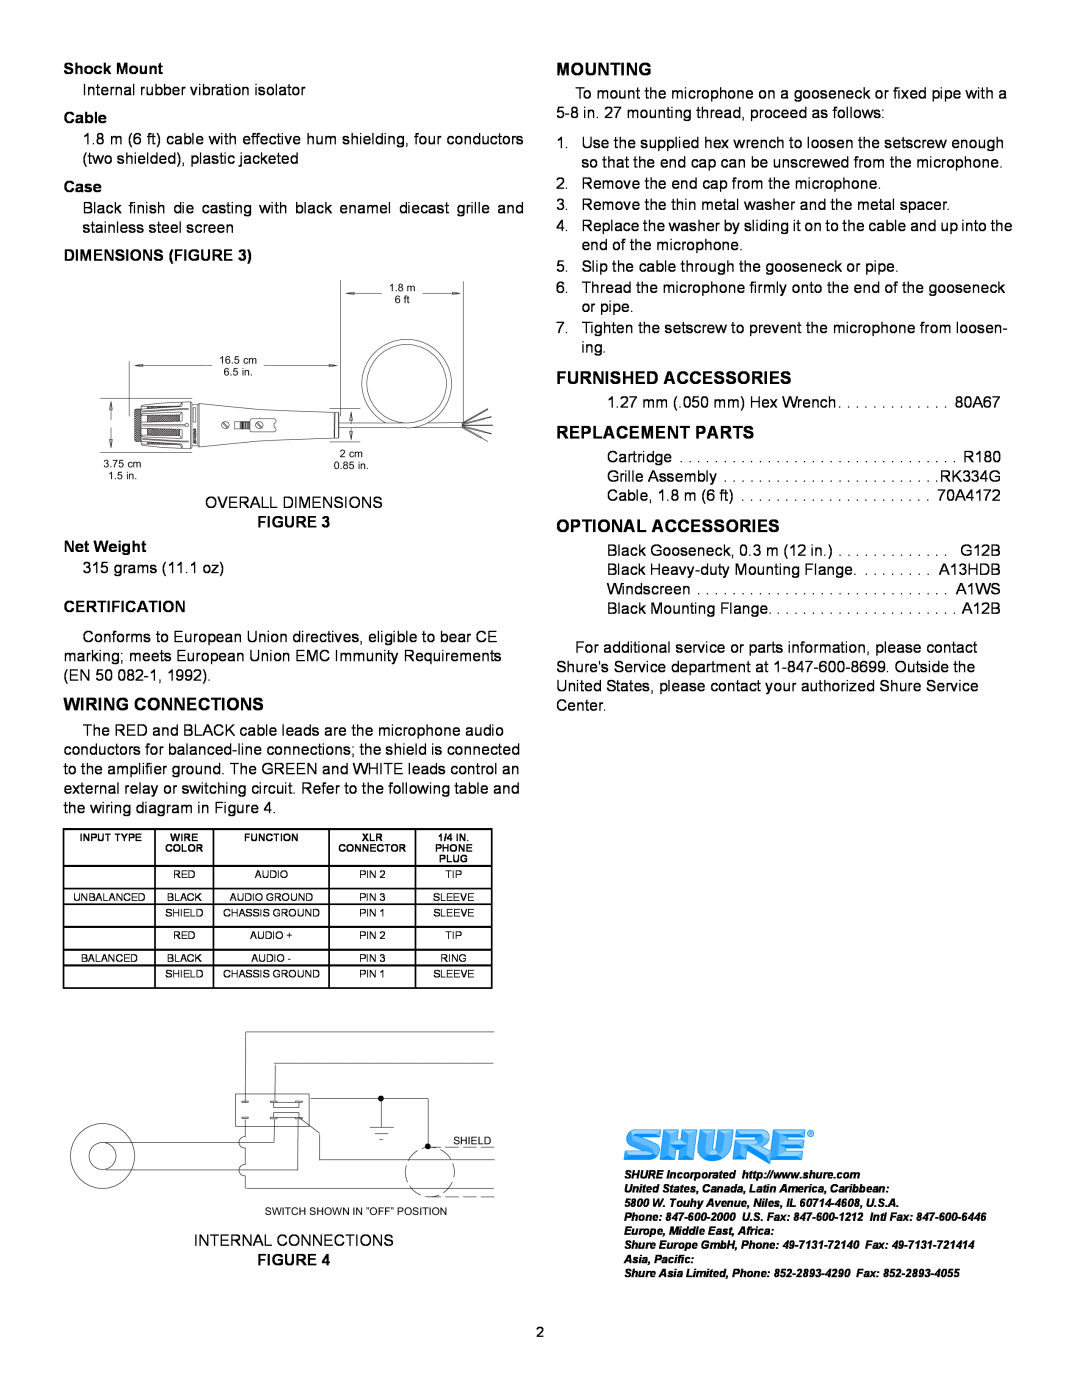 Shure 515BSLX Wiring Connections, Mounting, Furnished Accessories, Replacement Parts, Optional Accessories, Shock Mount 